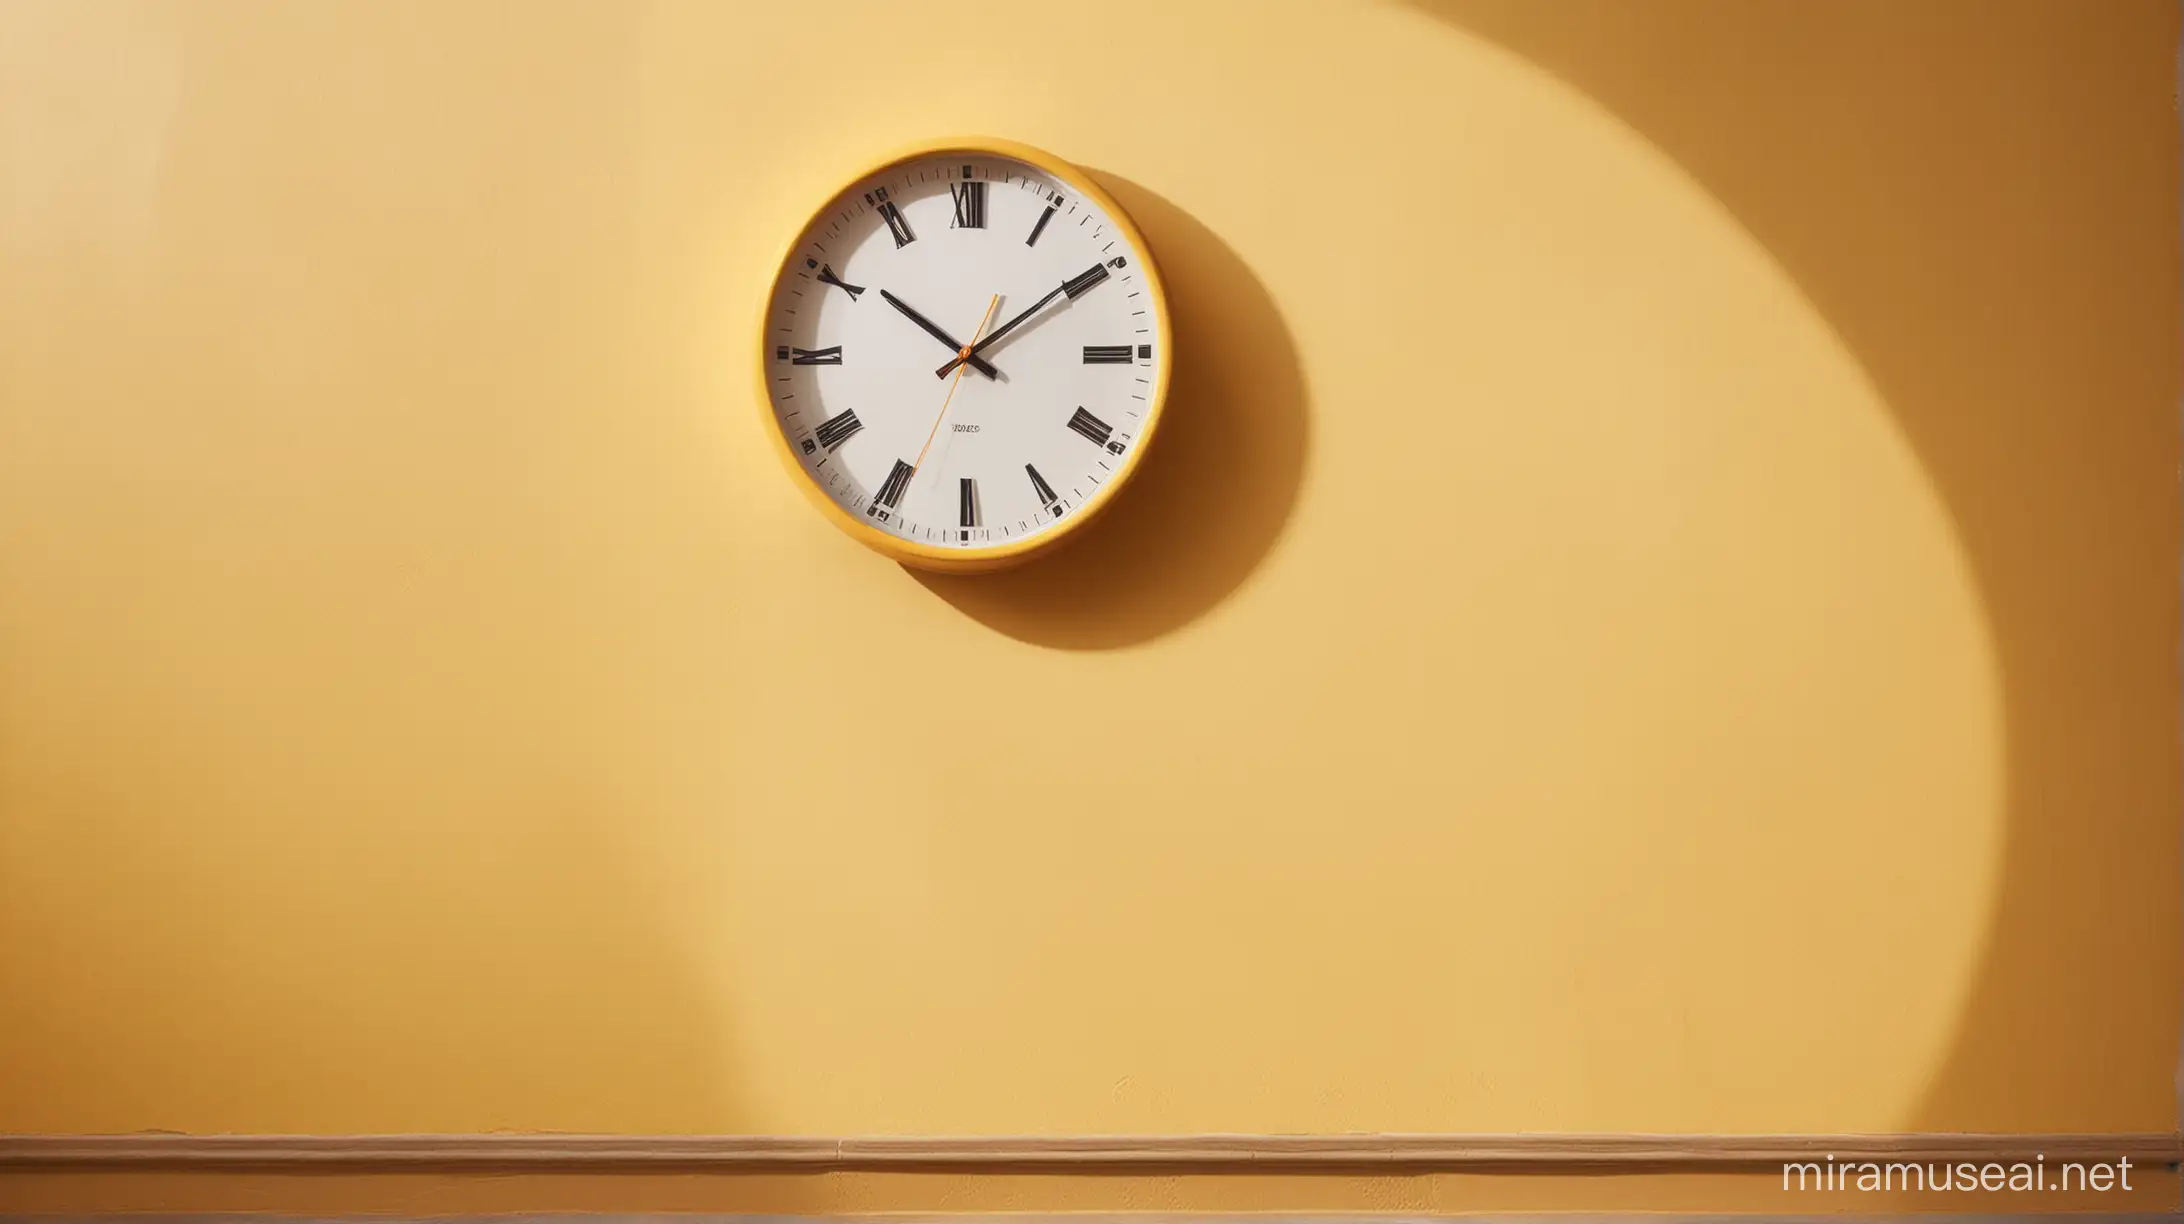 Vibrant Yellow Wall with Minimalist Clock and Sunlight Shadows